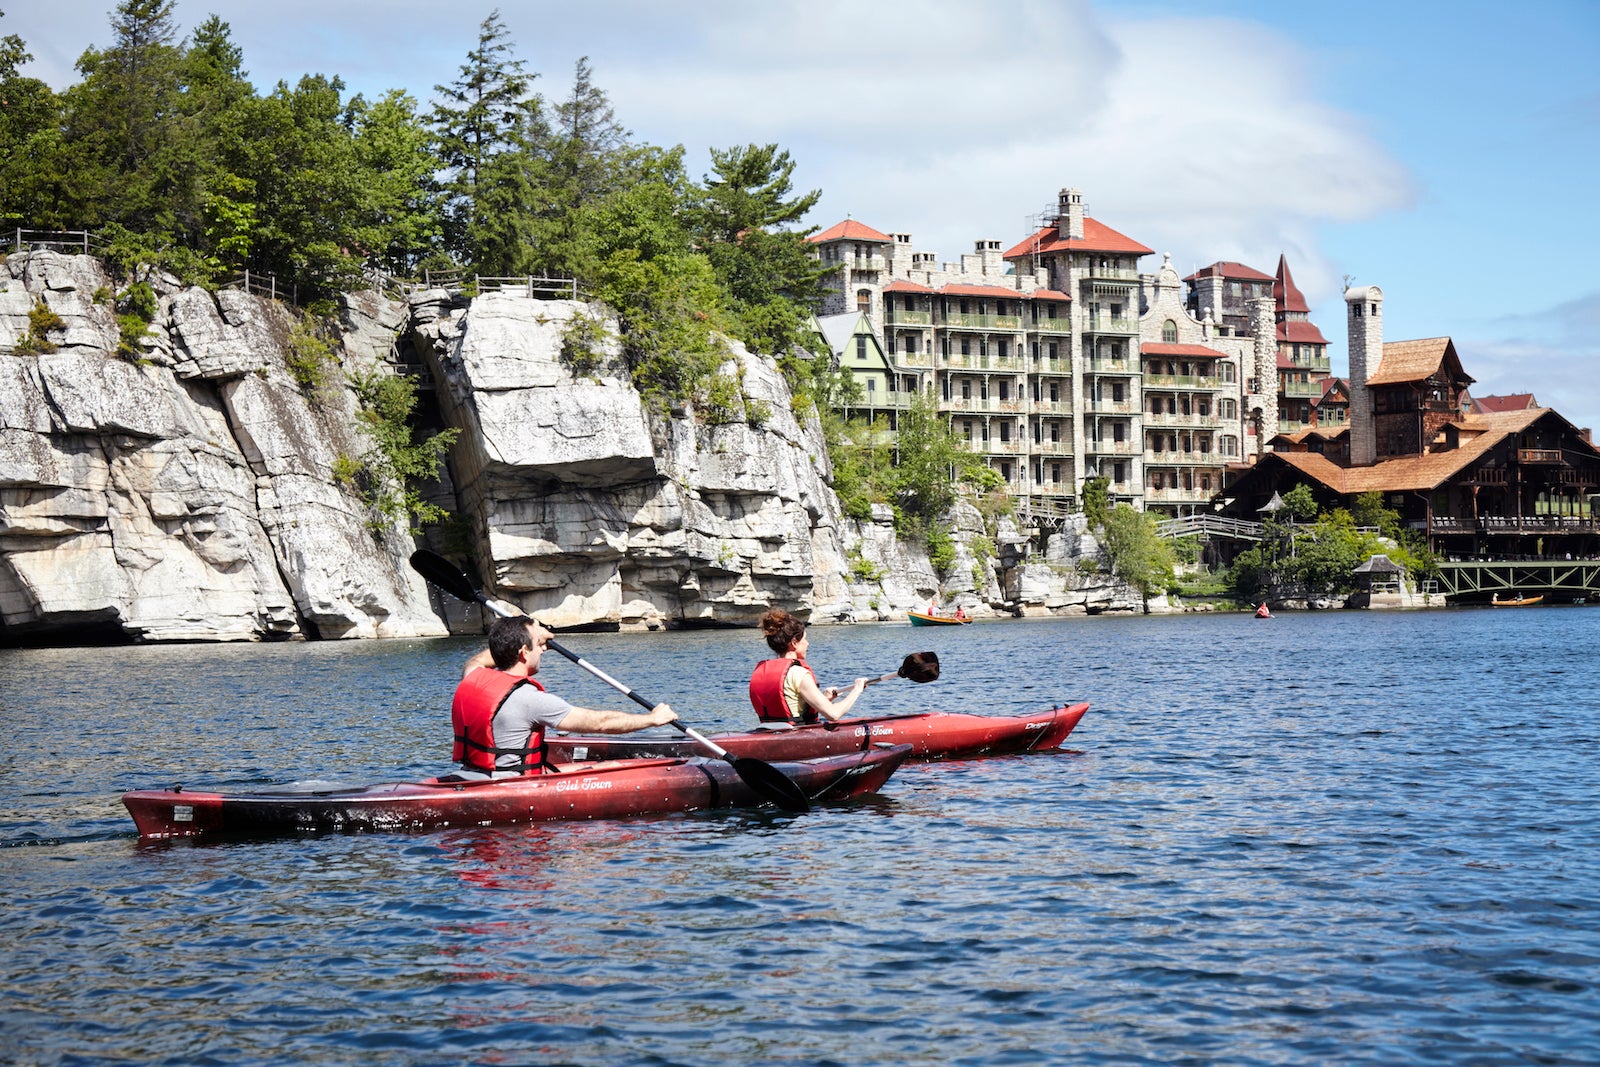 two people kayaking on lake in front of castle resort